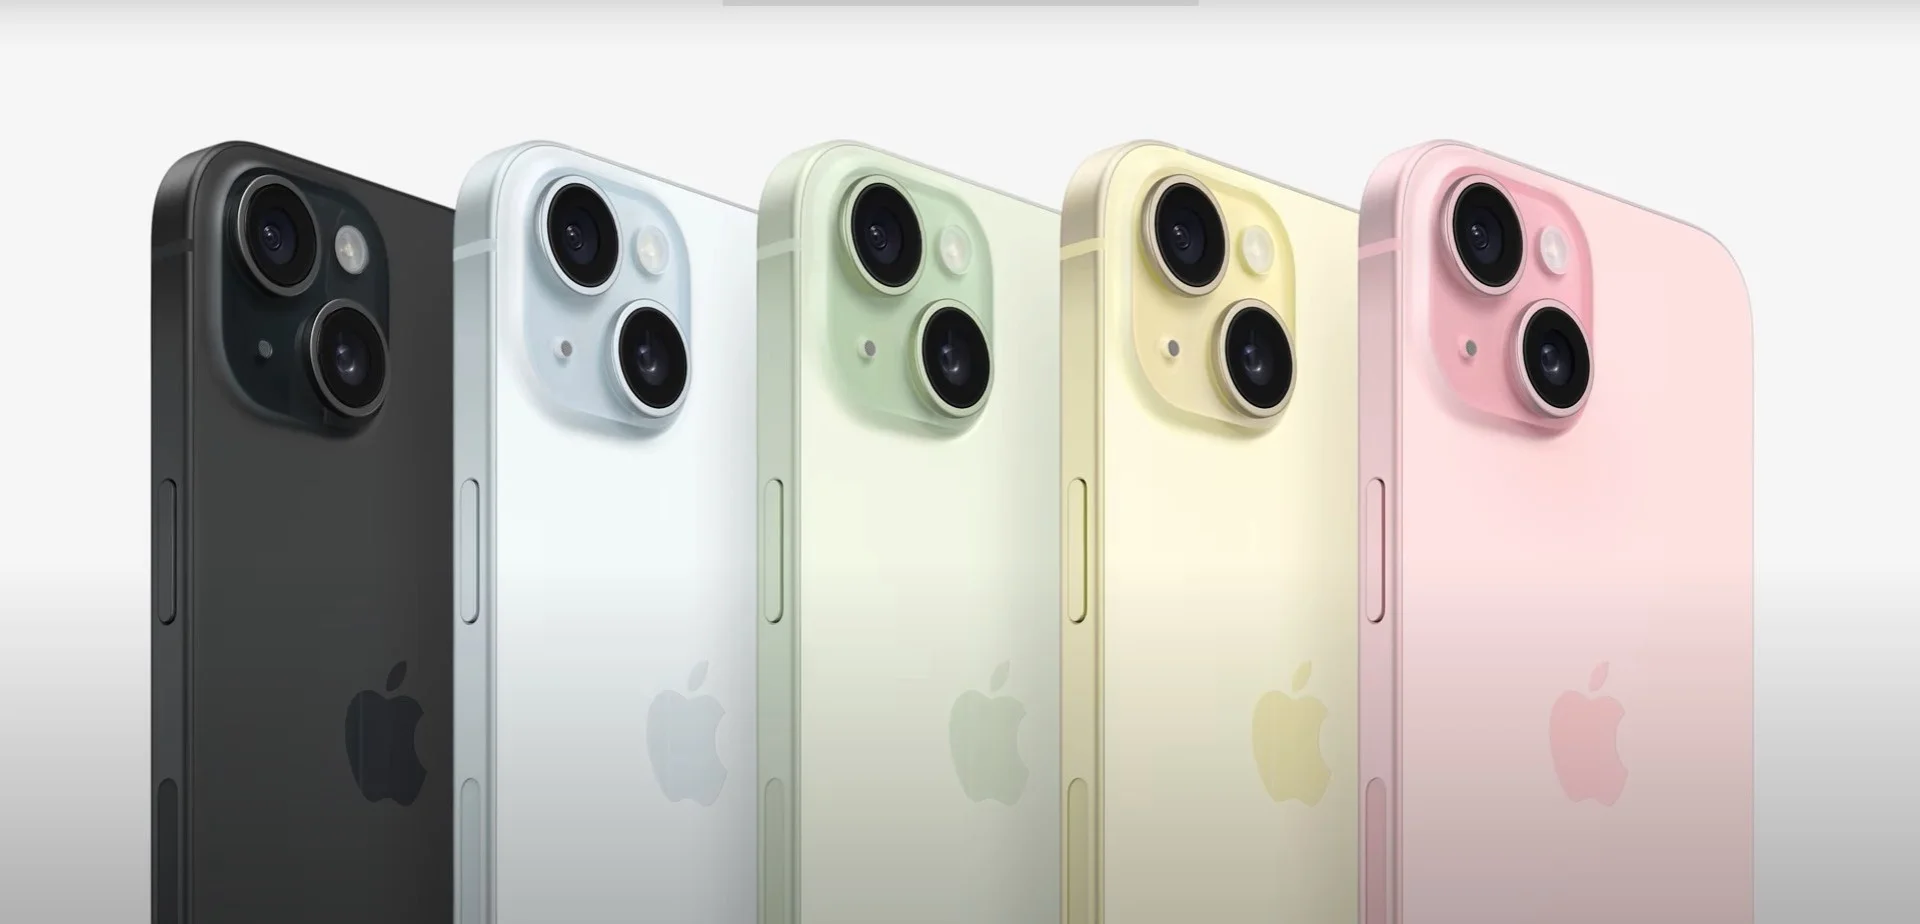 It became known what colors the iPhone 15 smartphones will receive